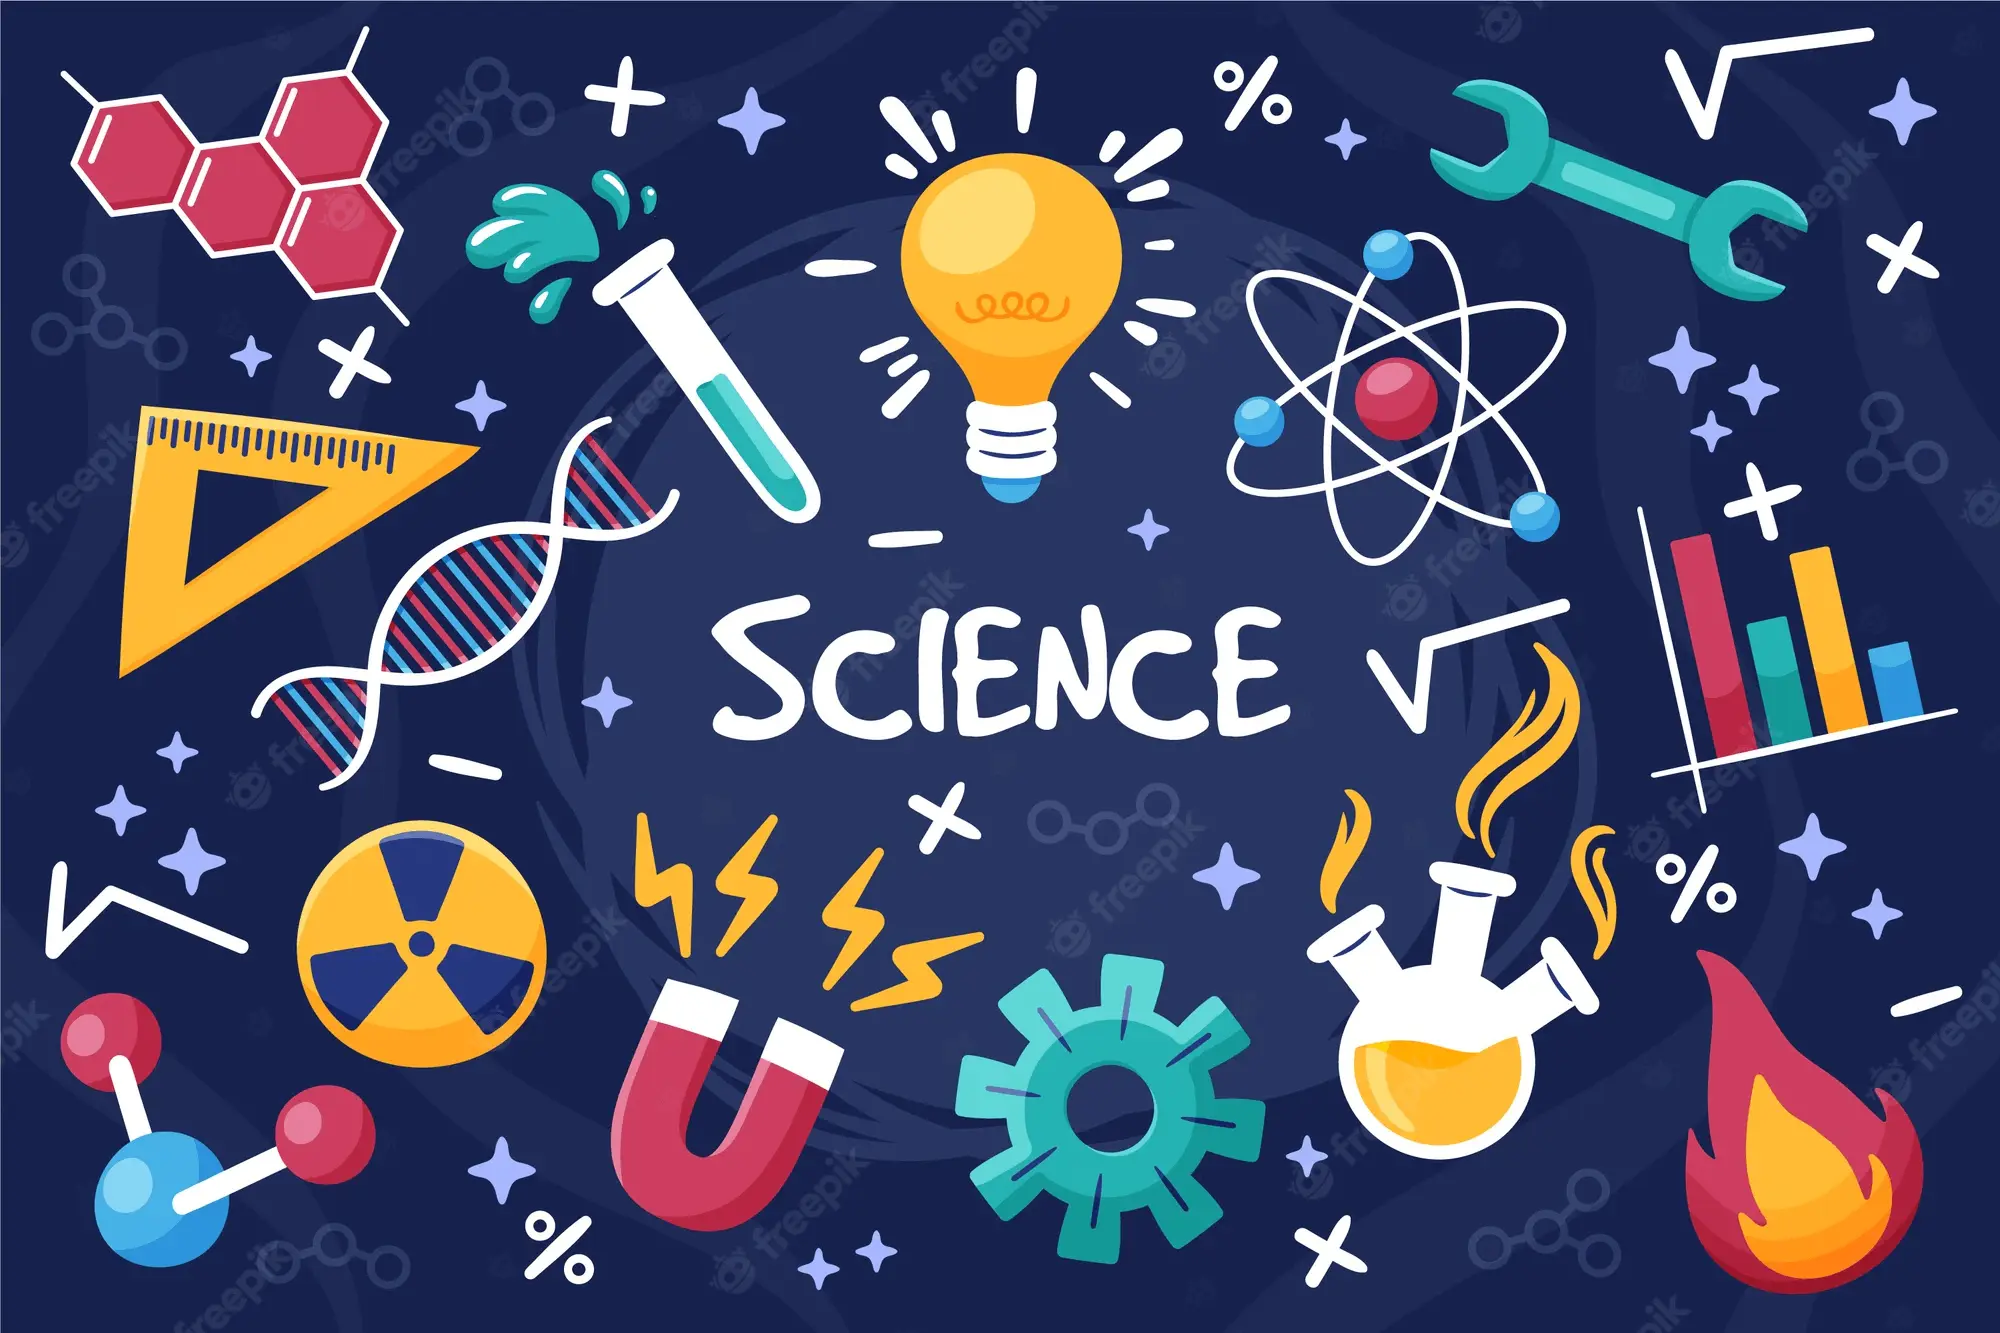 Science and Technology image